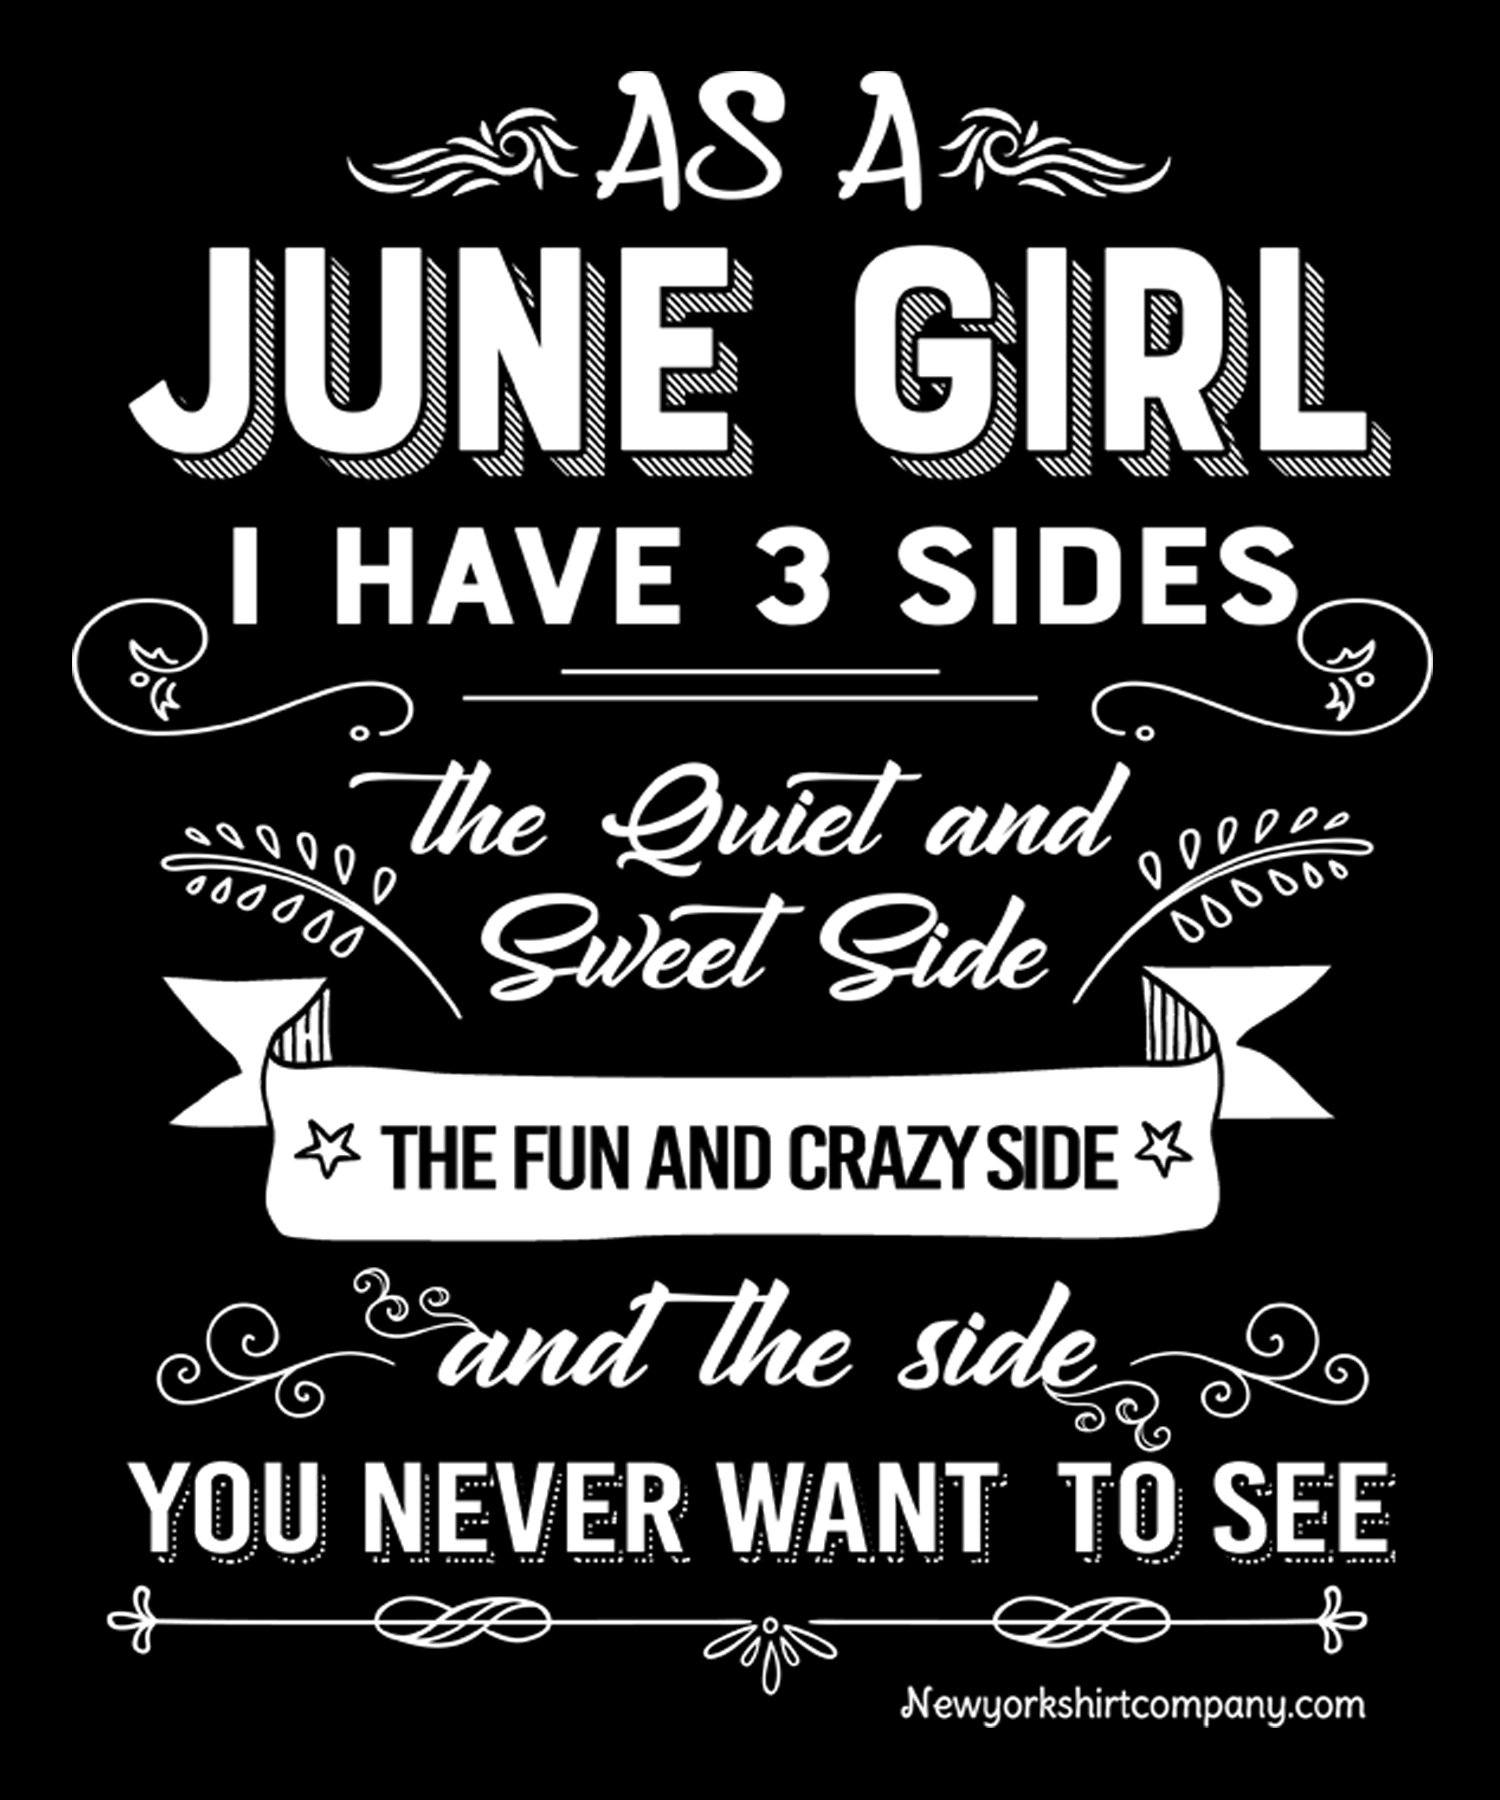 As a June Girl I have 3 Sides & pre-approved